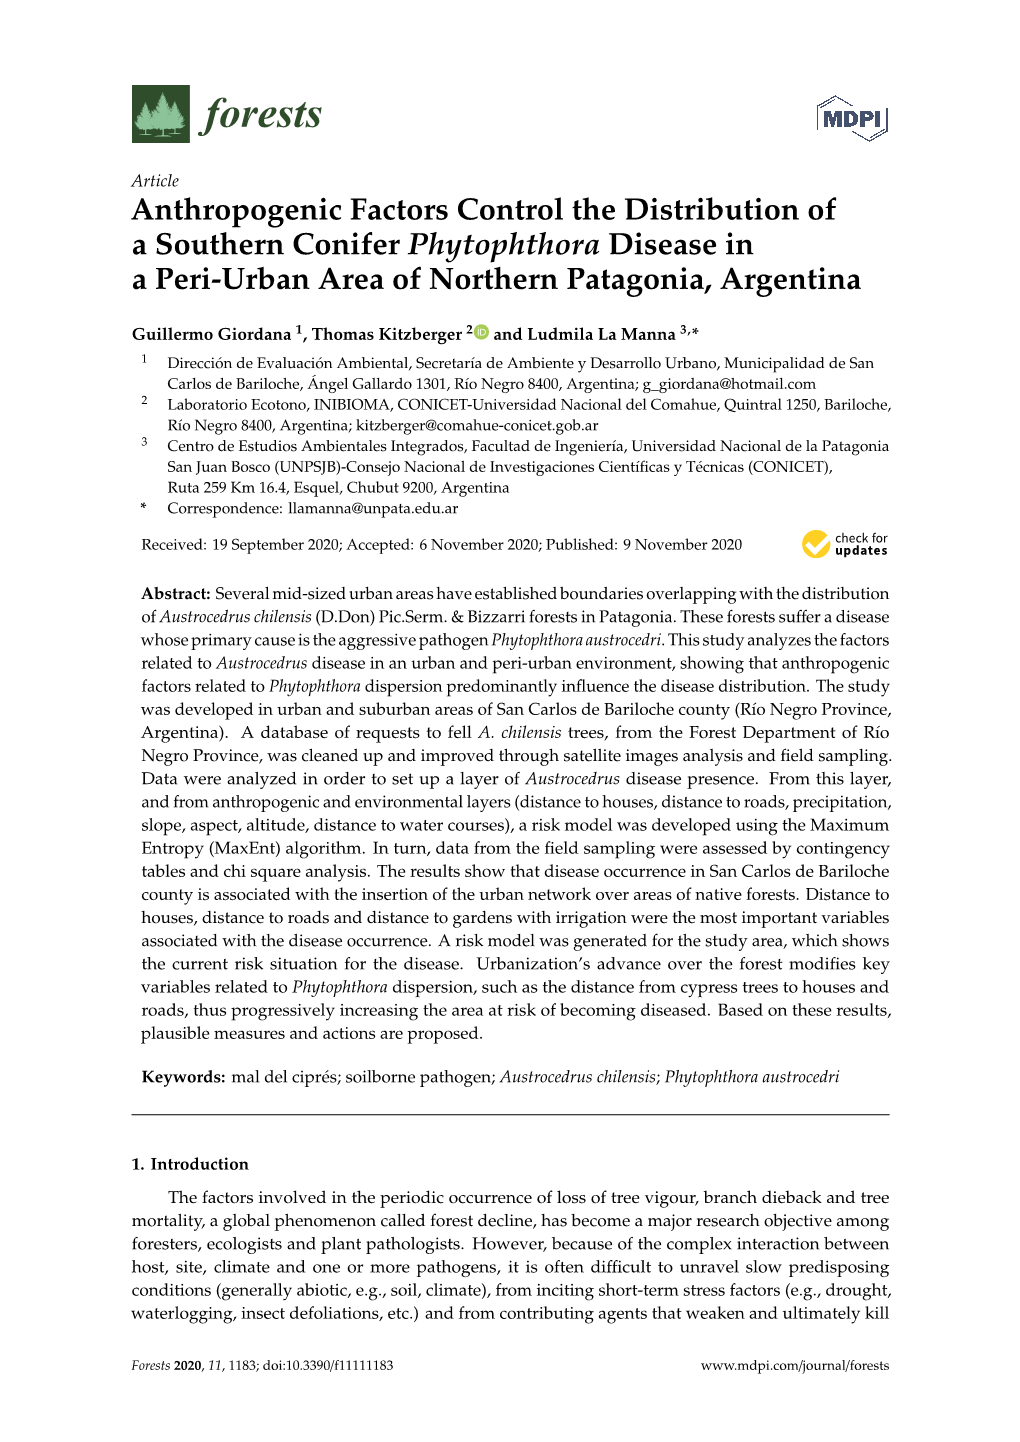 Anthropogenic Factors Control the Distribution of a Southern Conifer Phytophthora Disease in a Peri-Urban Area of Northern Patagonia, Argentina